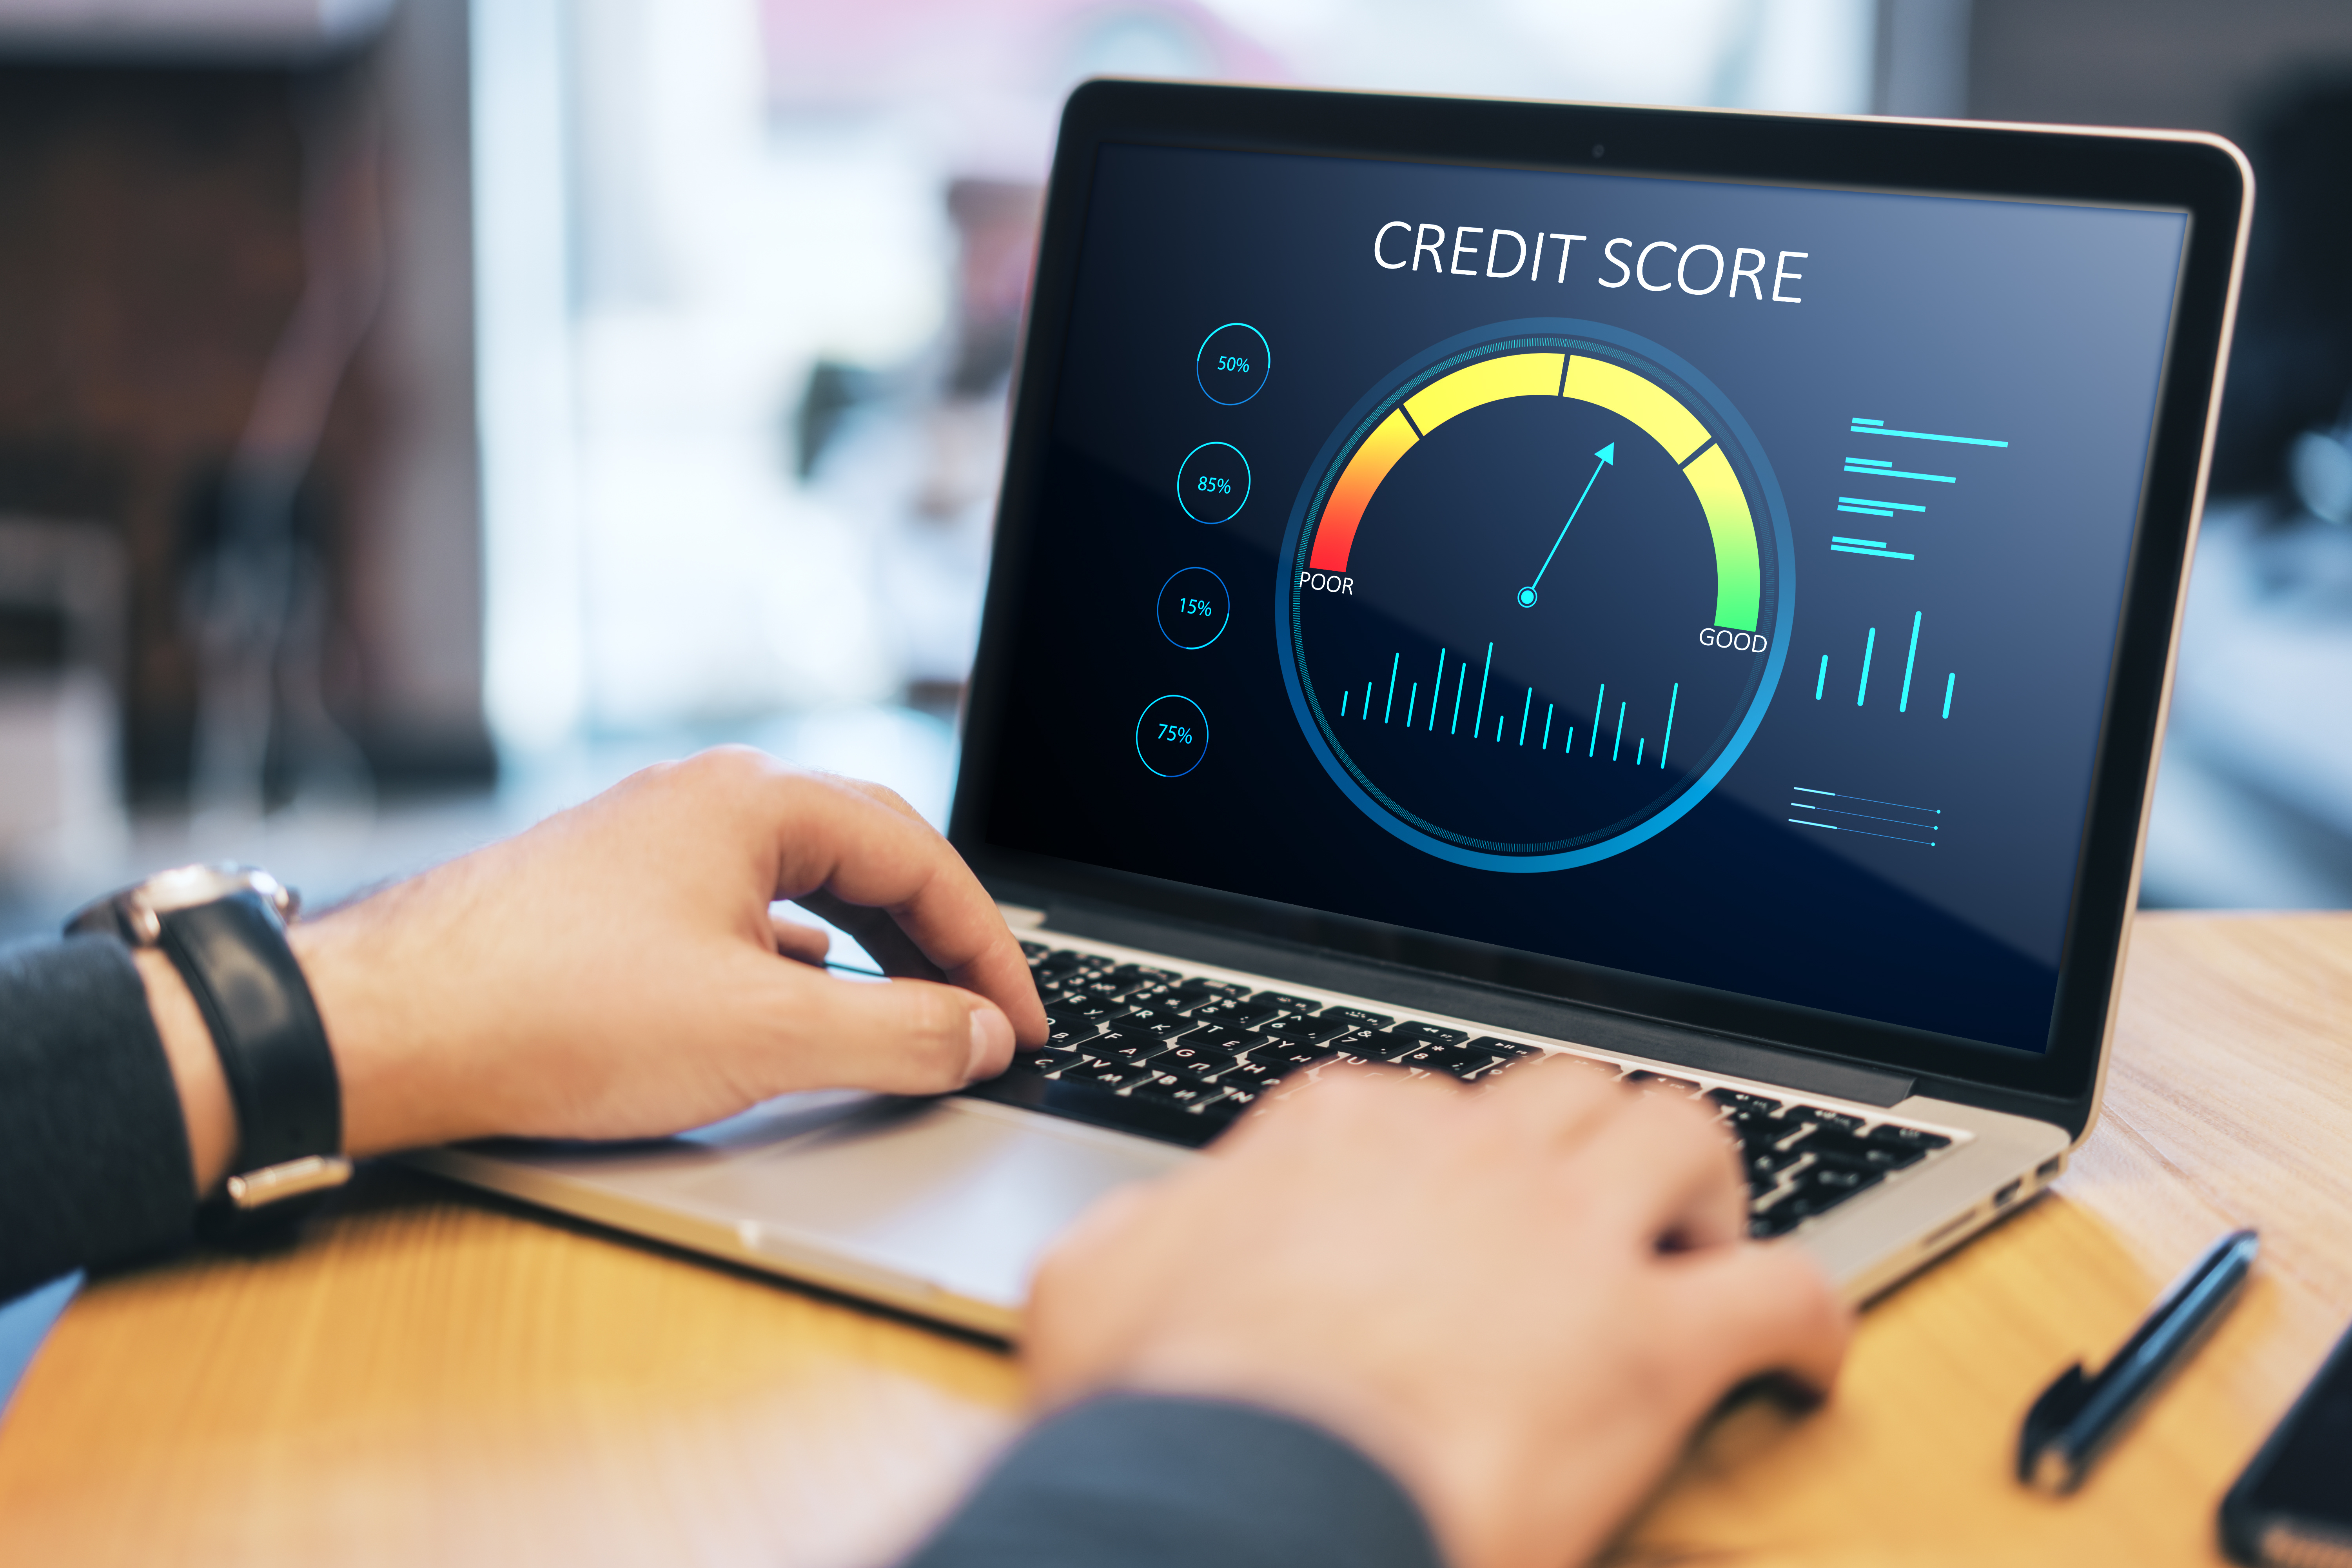 You can get a loan with all types of scores! Source: Adobe Stock.